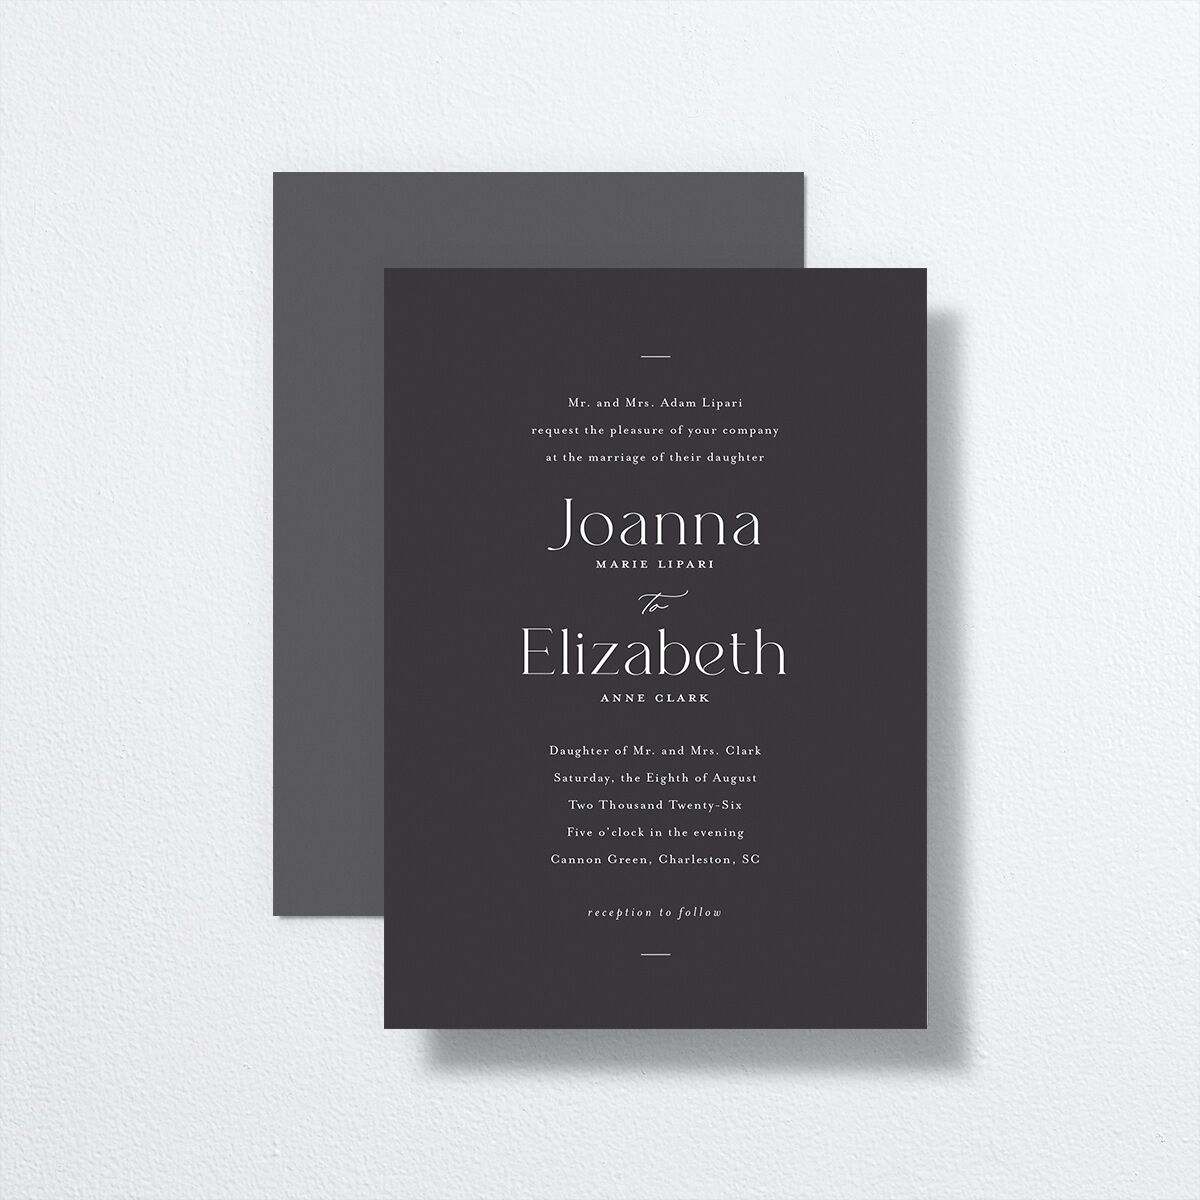 Refined Wedding Invitations front-and-back